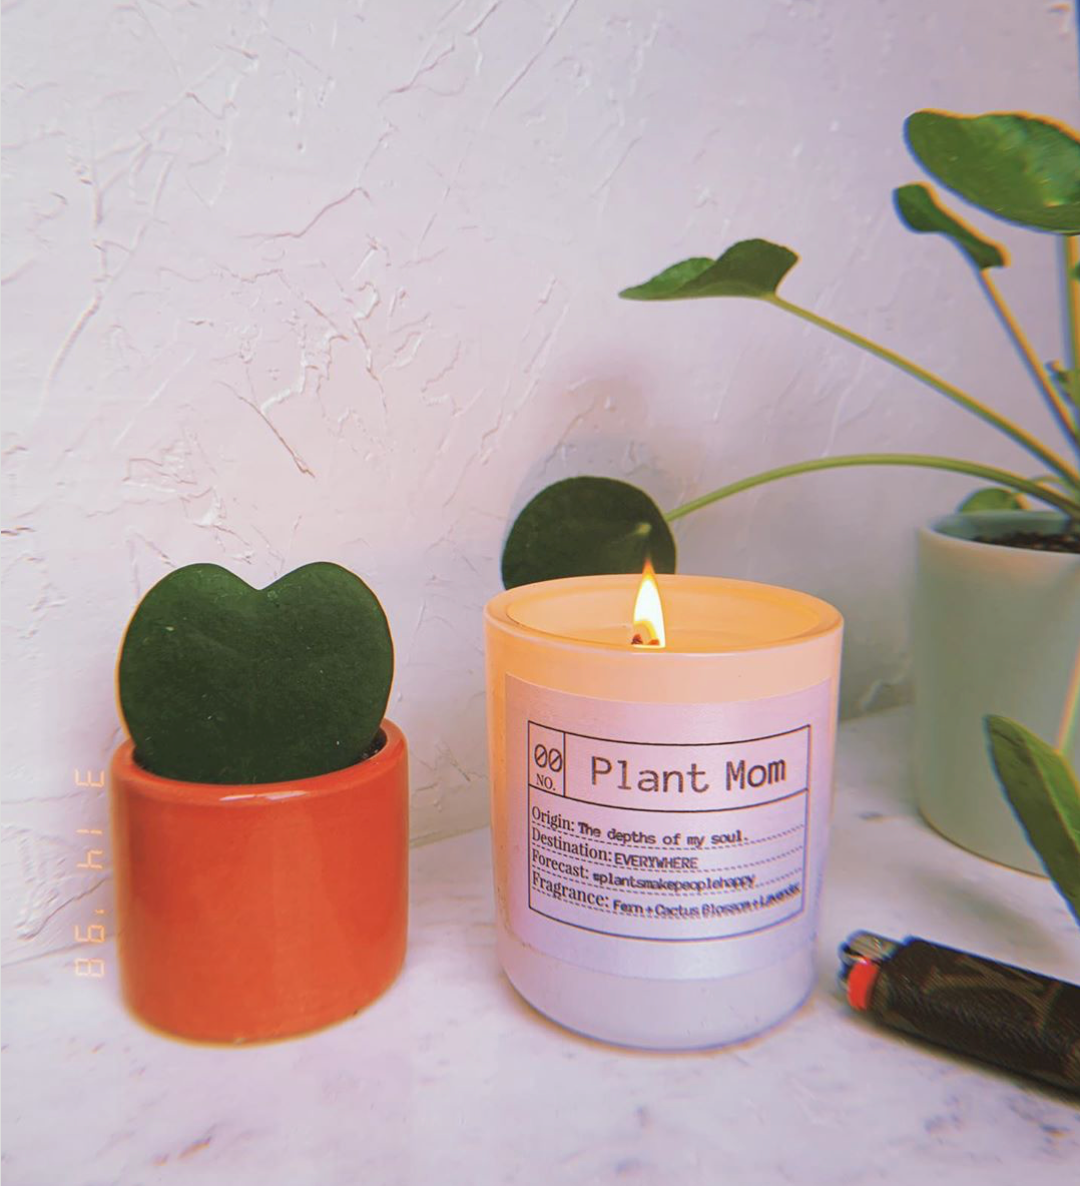 Makes Perfect Scents: The Flores Lane Newsletter #1